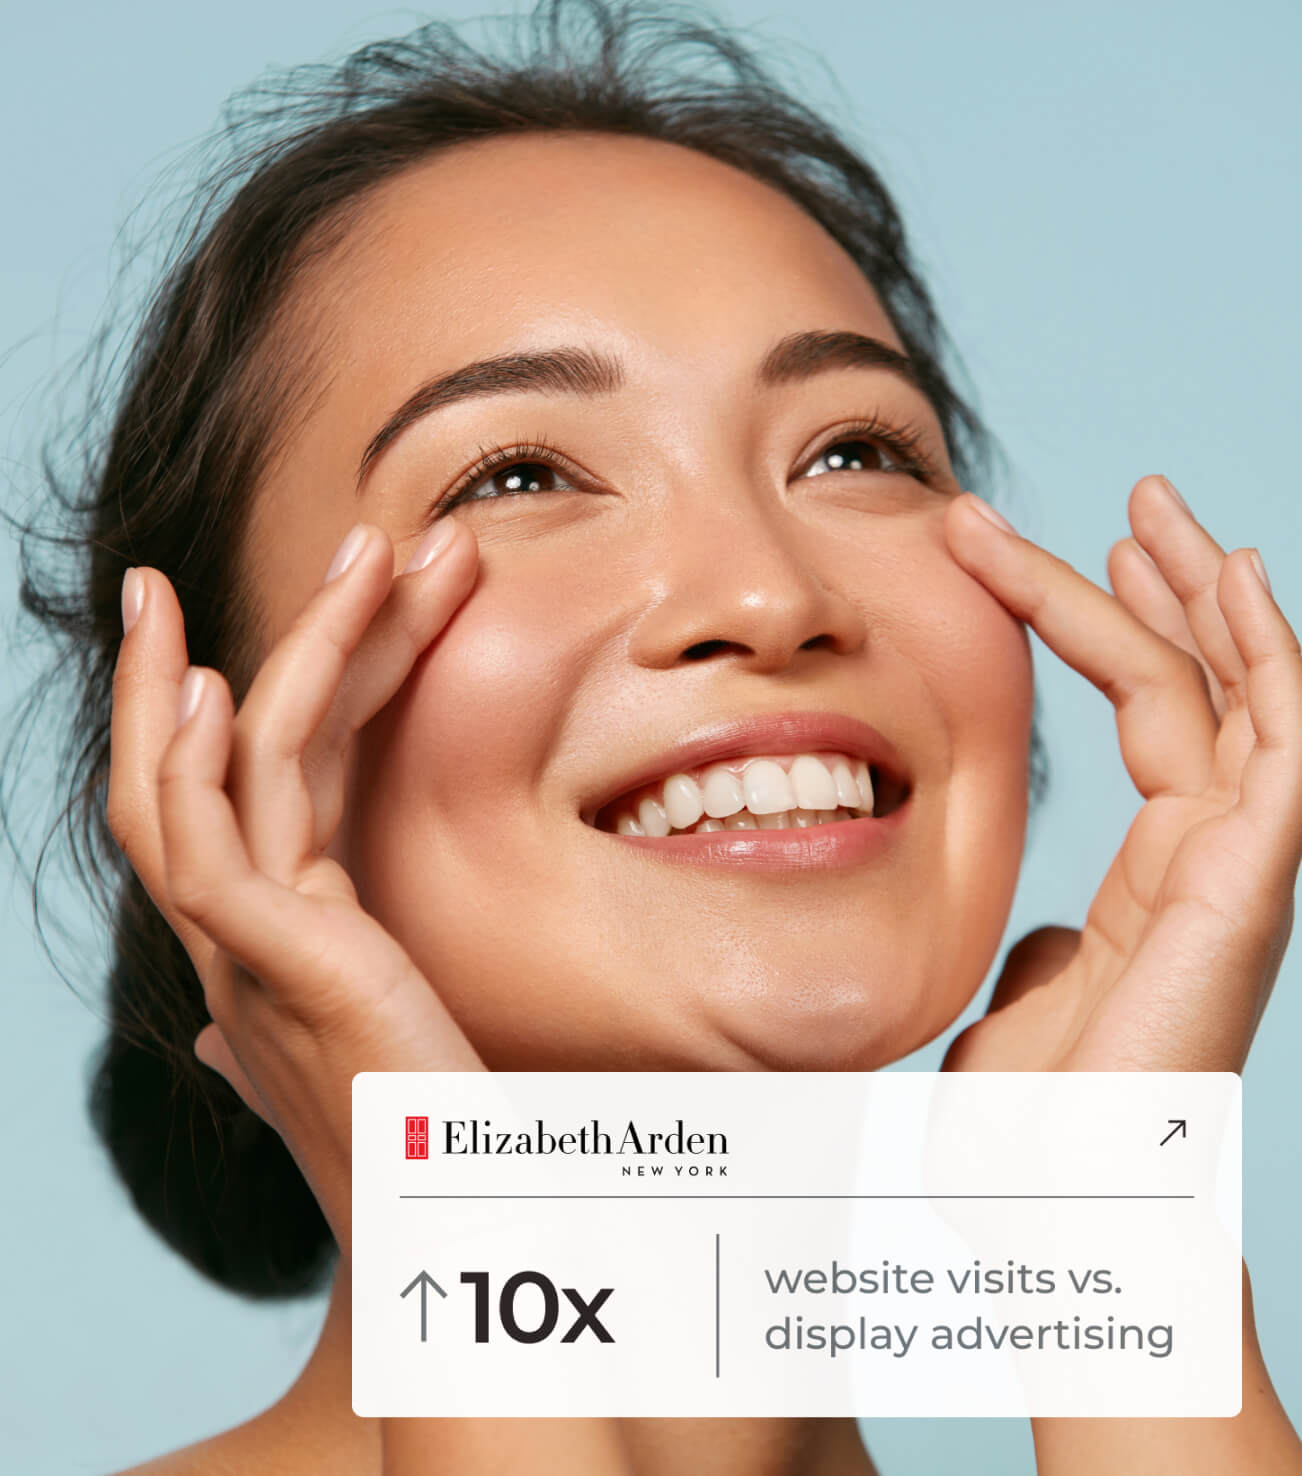 Elizabeth Arden - 10x more visits to the product page vs display advertising